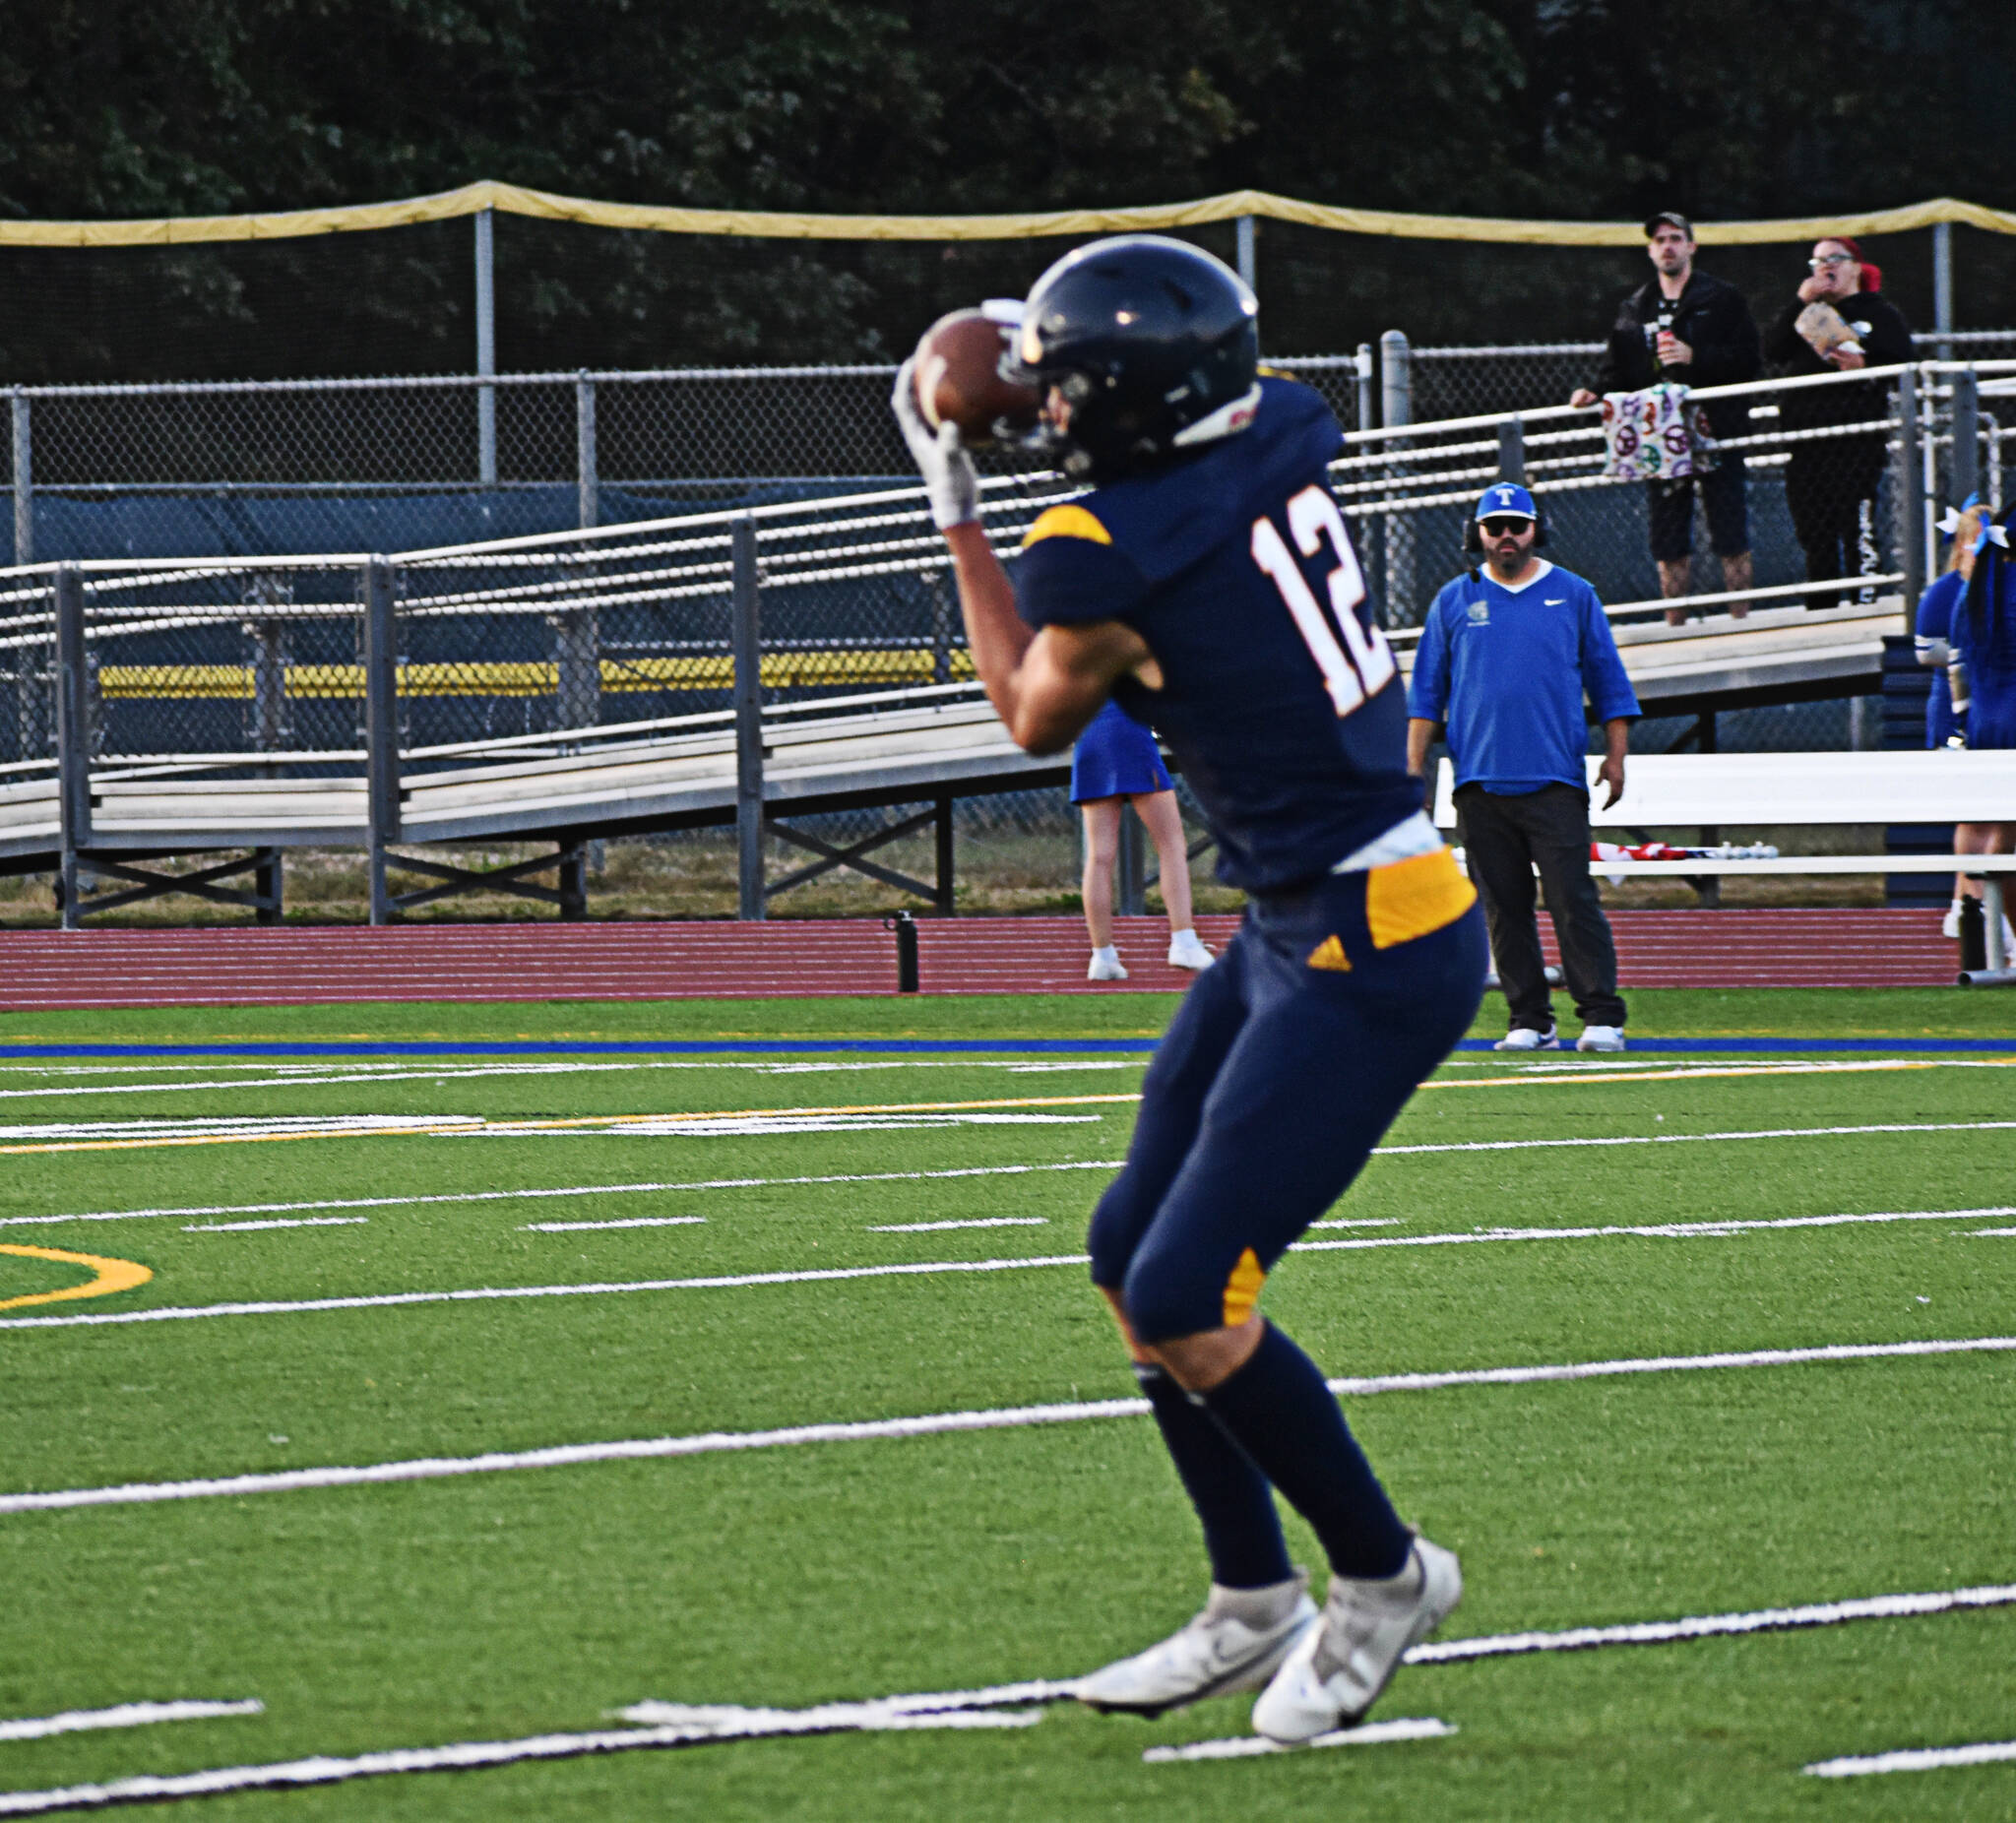 Bainbridge’s tight end Luca Scheltens moves the ball downfield after catching the pass from Jack Grant.